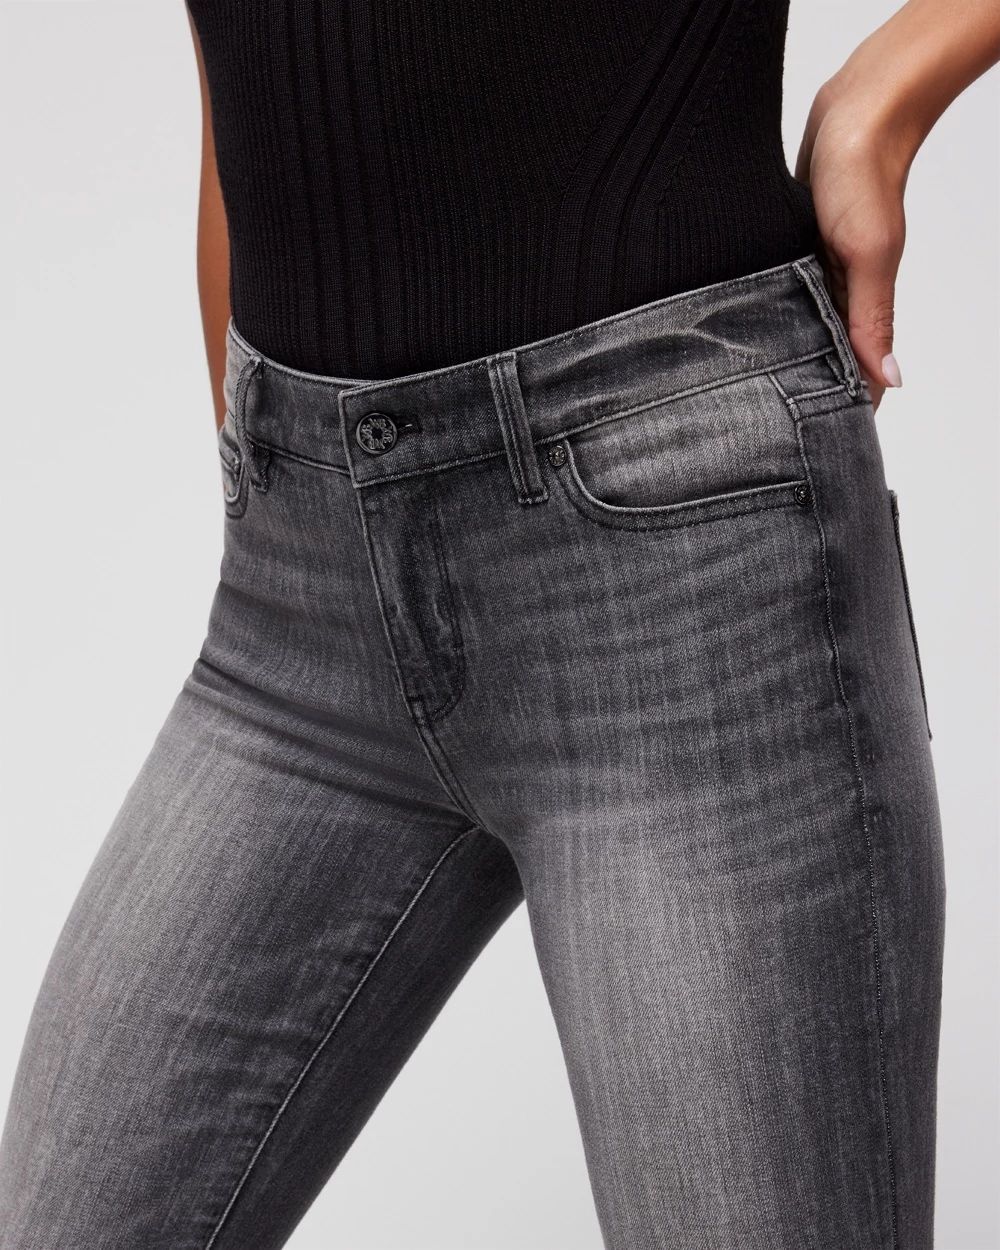 Petite Mid-Rise Bootcut Jeans click to view larger image.